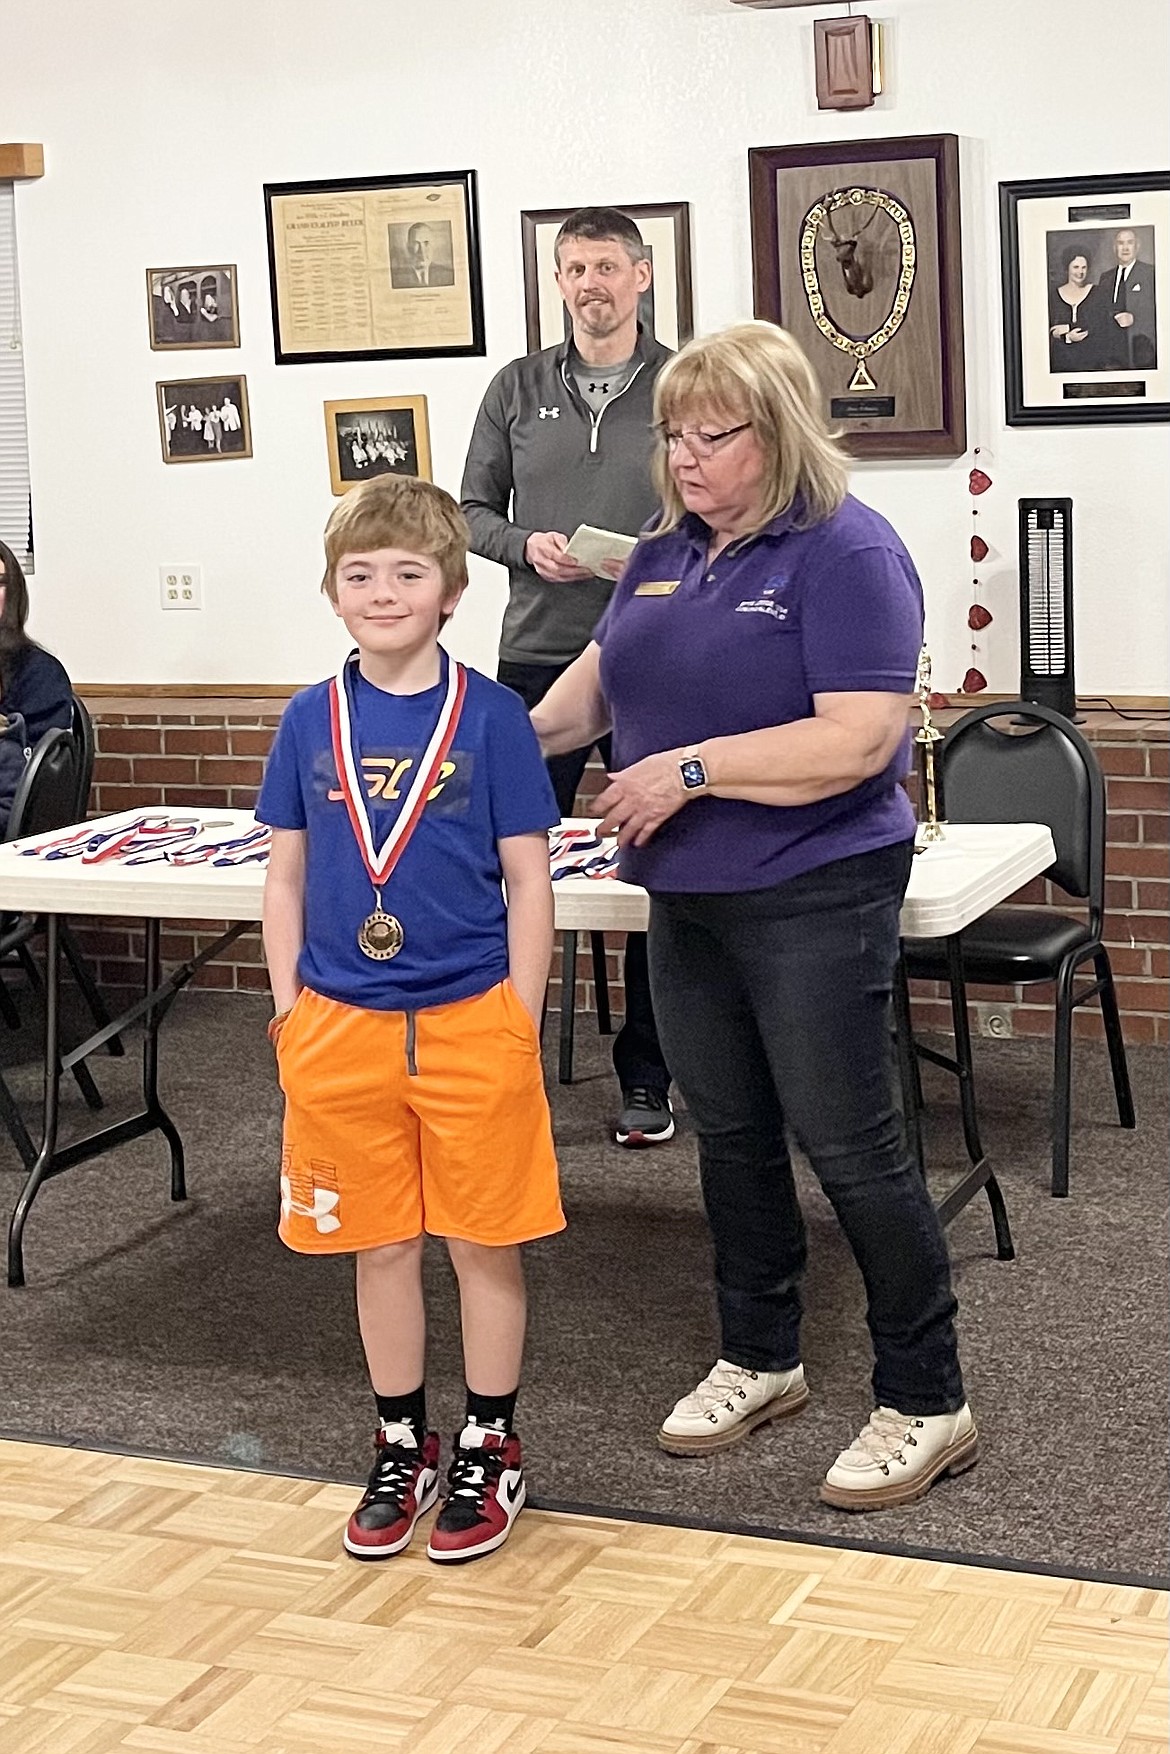 Courtesy photo
Wesley Trost won the boys 8-9 age division at the Coeur d'Alene Elks Hoop Shoot held Feb. 20 at The Courts at Real Life in Post Falls. Also pictured is Debbi Nadrchal, Elks Exalted Ruler, and Todd Stoddard, Hoop Shoot director.